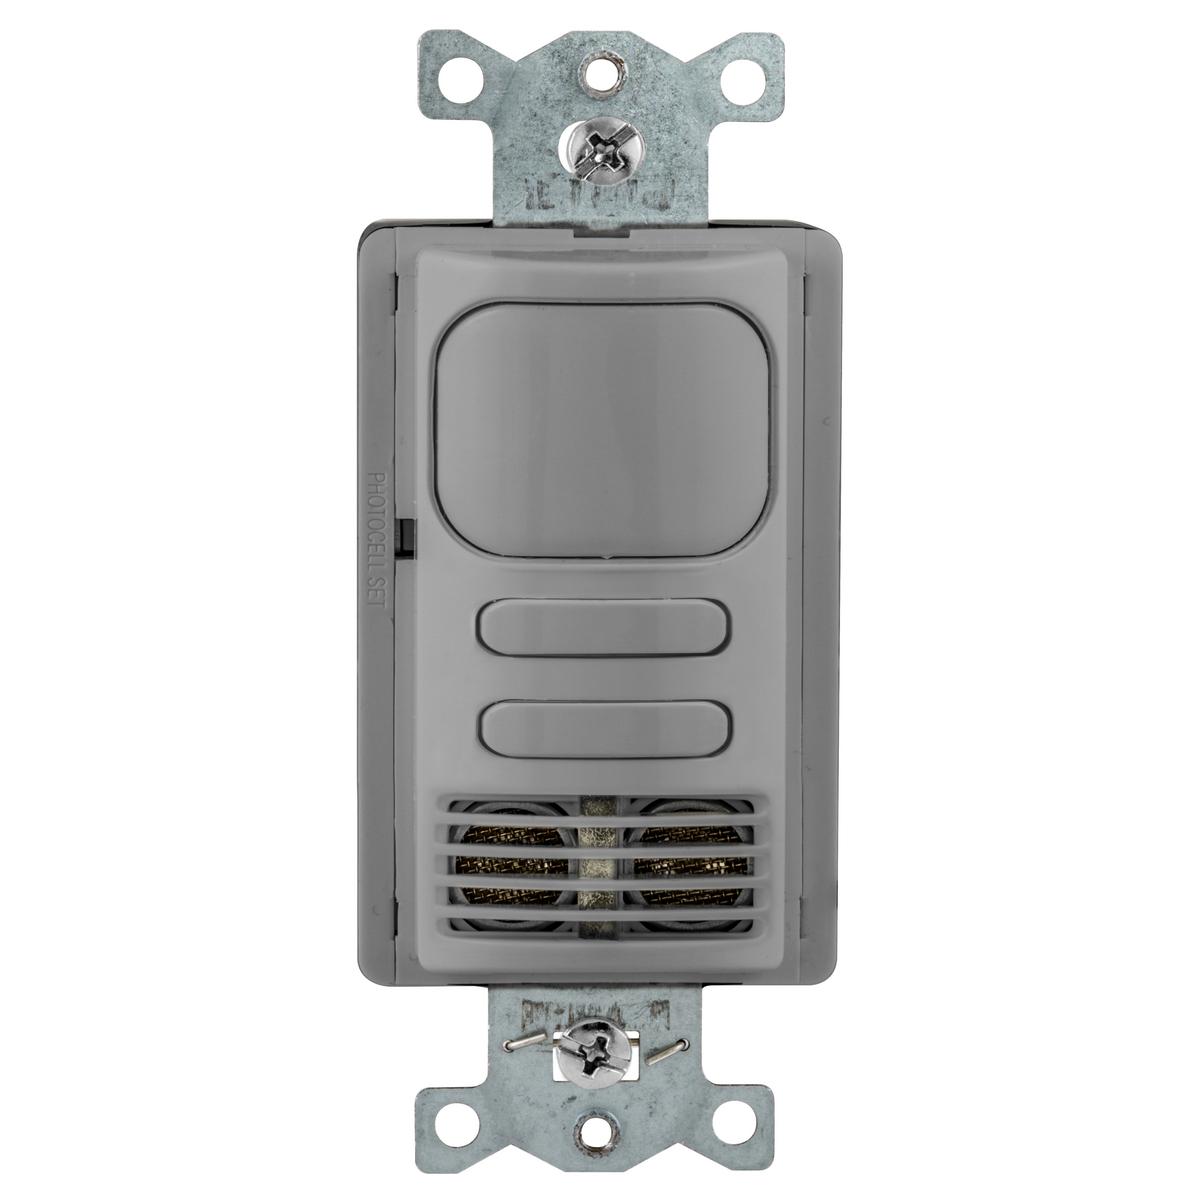 Hubbell AD2241GY2 Vacancy Sensors, Wall Switch, AdaptiveDual Technology, 2 Circuit, 24V DC, Gray 